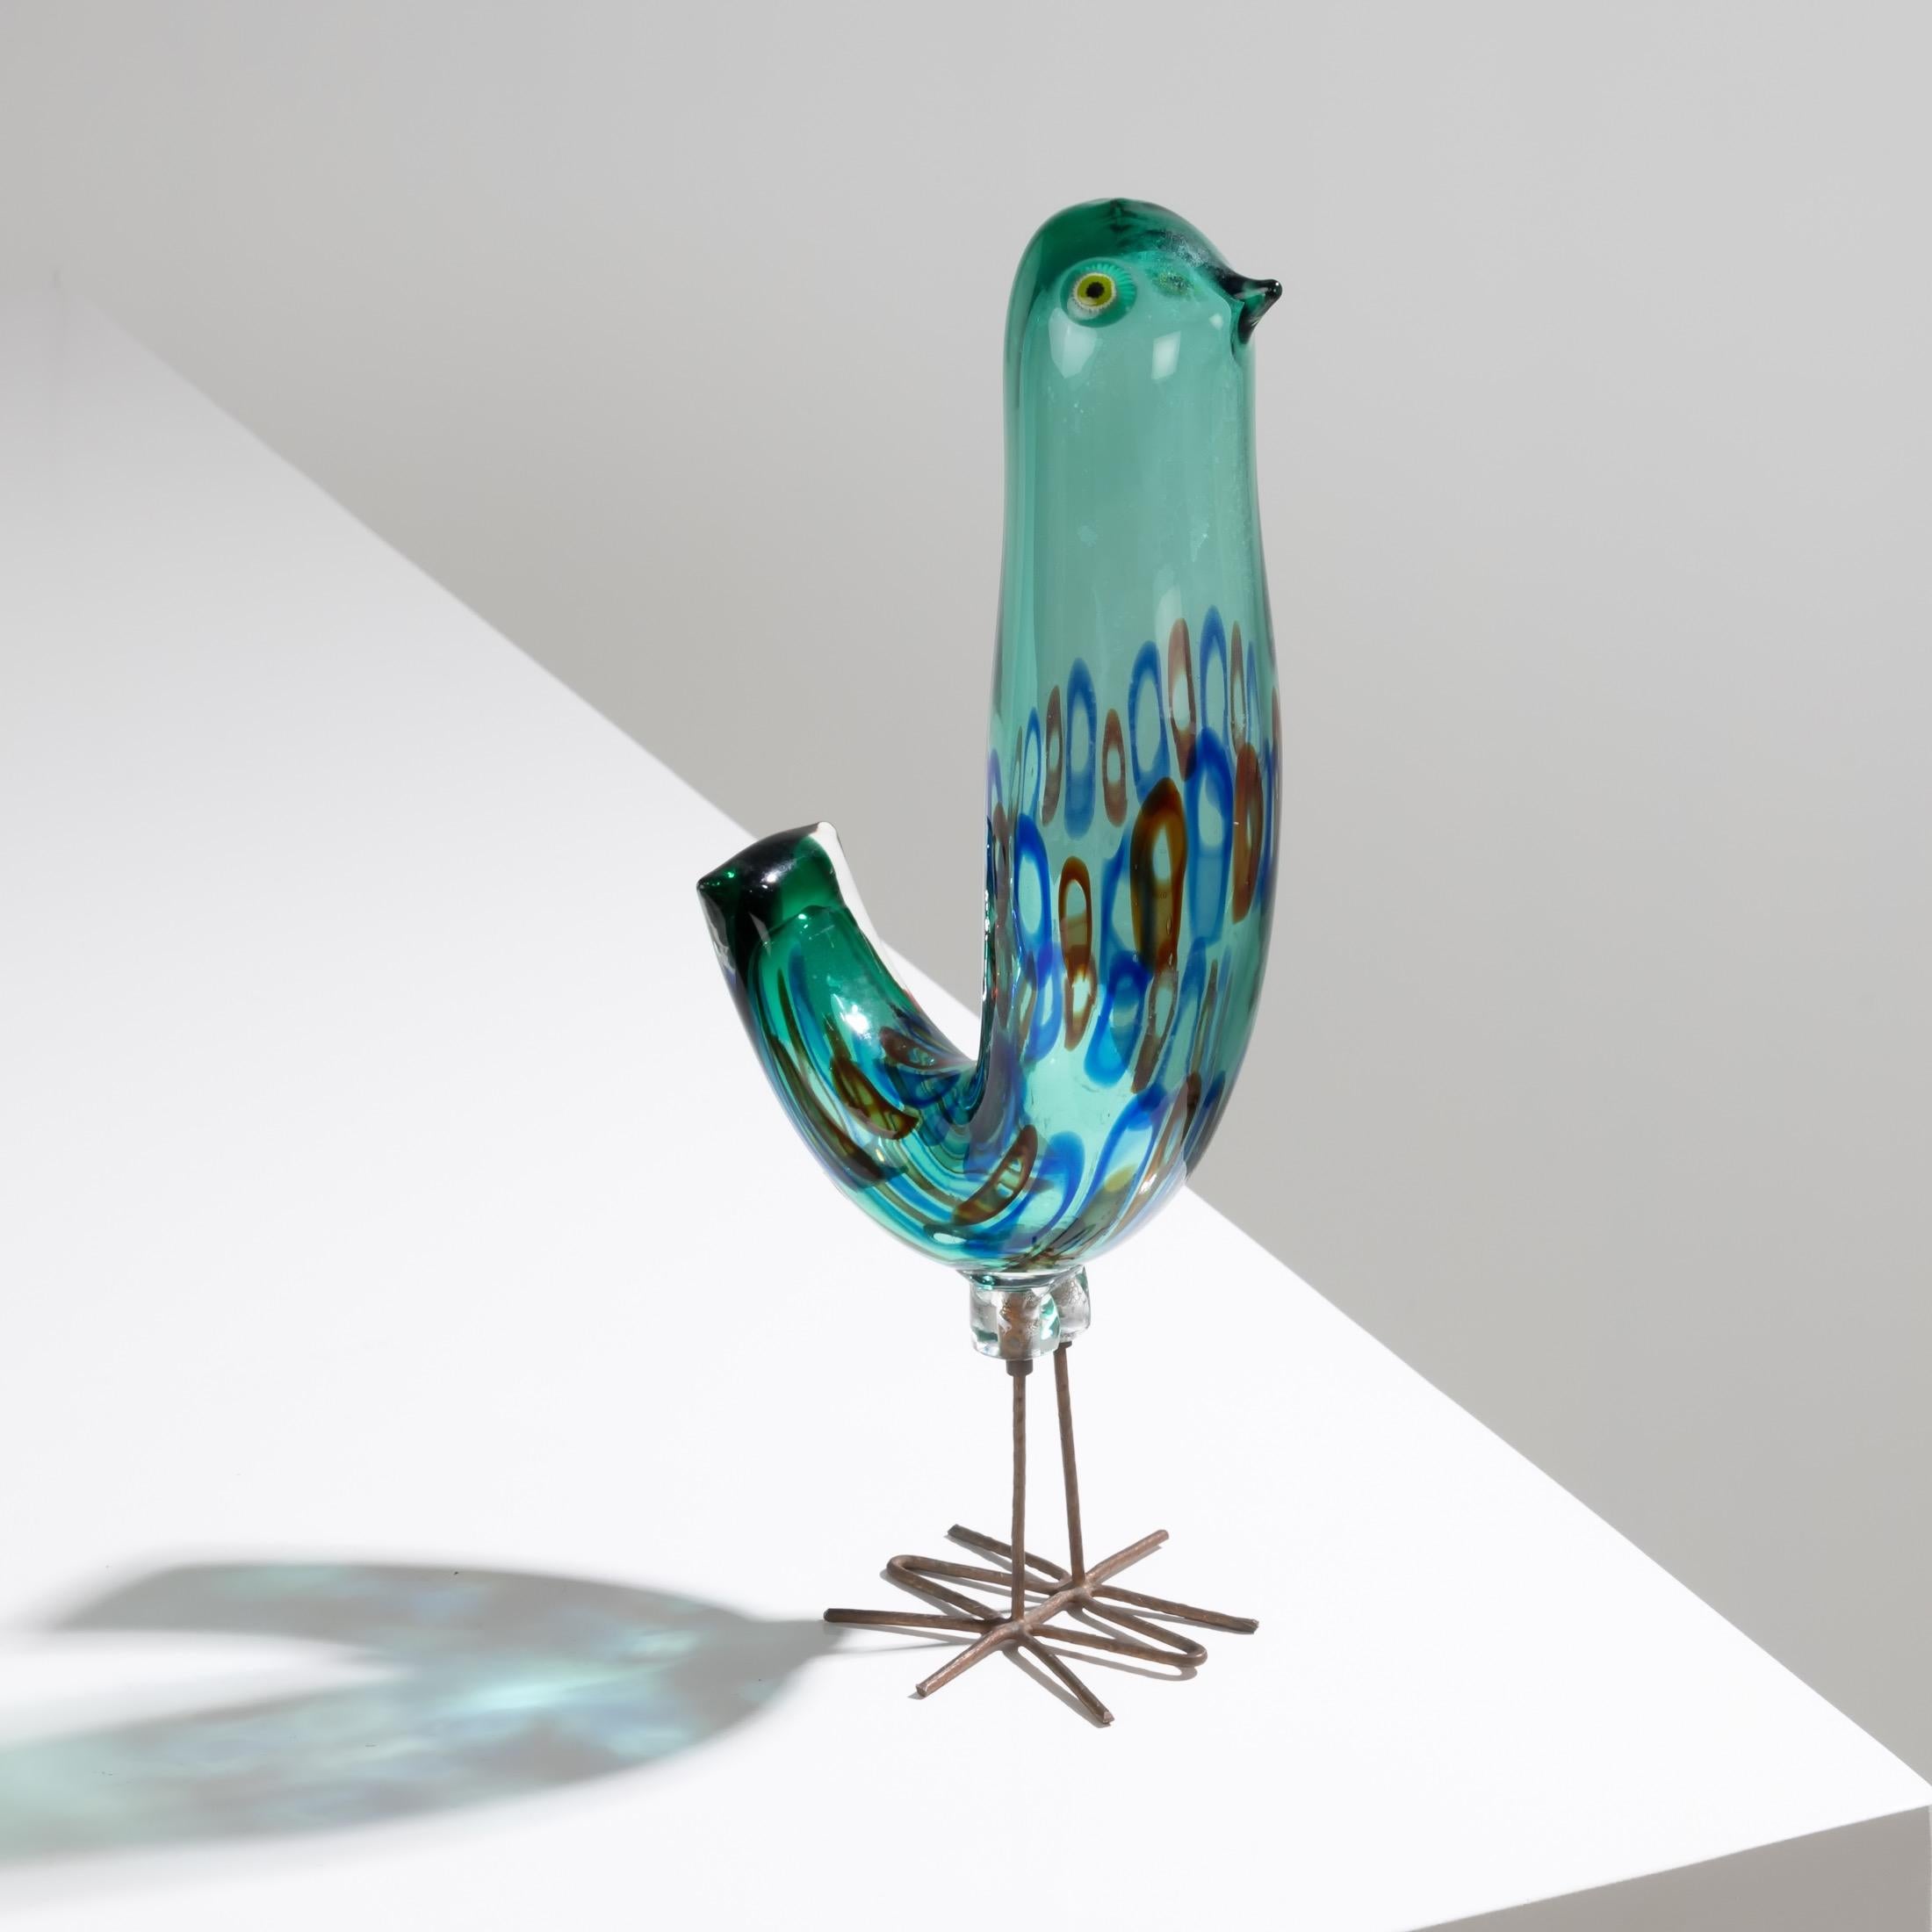 Glass bird resting on its hammered copper legs, designed by Alessandro Pianon for Vistosi in Murano, in 1962.
Its green glass body is decorated with red and blue murrines. its eyes are made of hot-applied murrines.
The object is listed in the